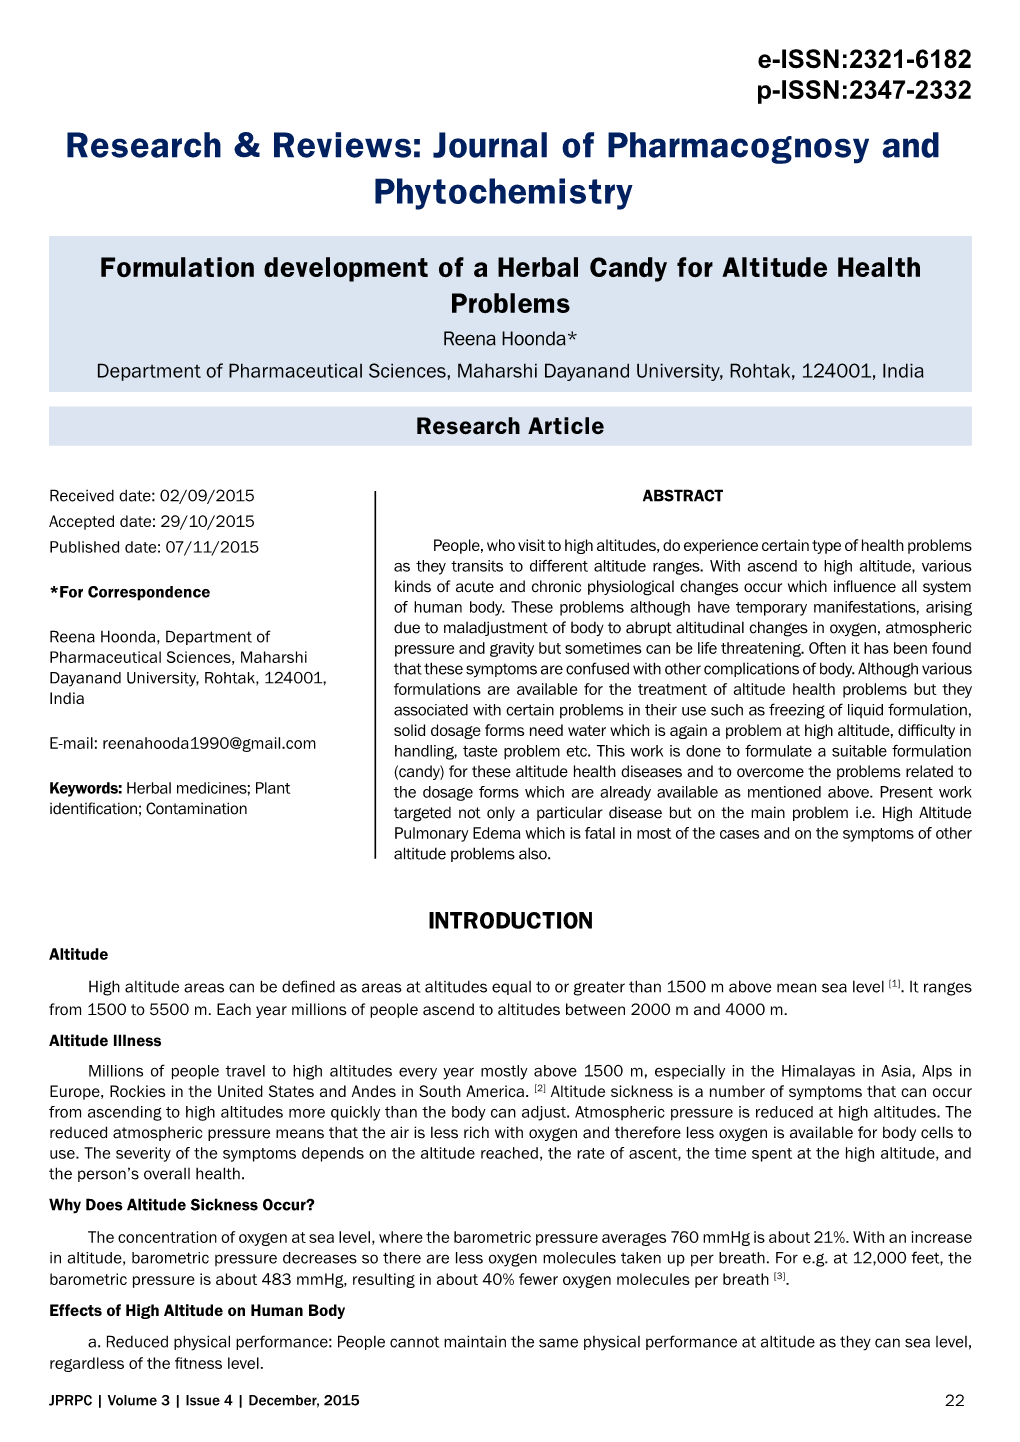 Formulation Development of an Herbal Candy for Altitude Health Problems